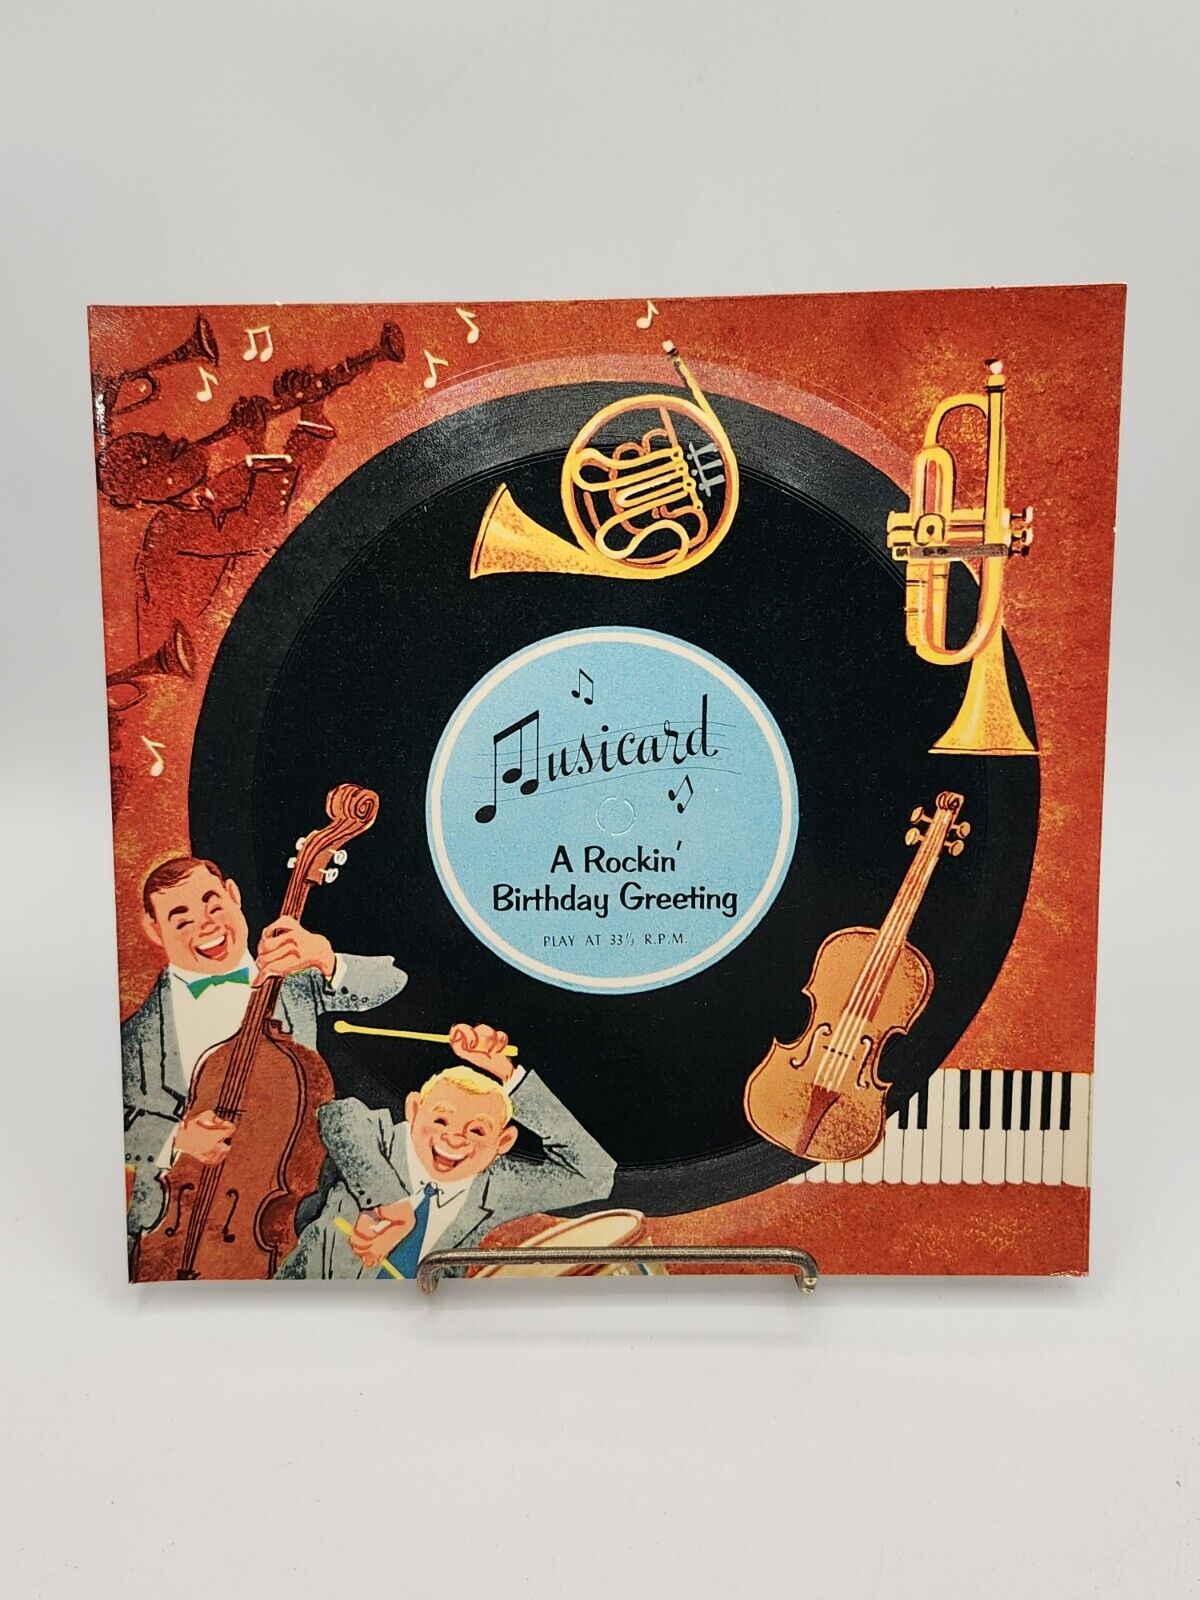 Vintage NOS Playable Birthday Greeting Card IT'S A RECORD Big Band 33 RPM 1958 